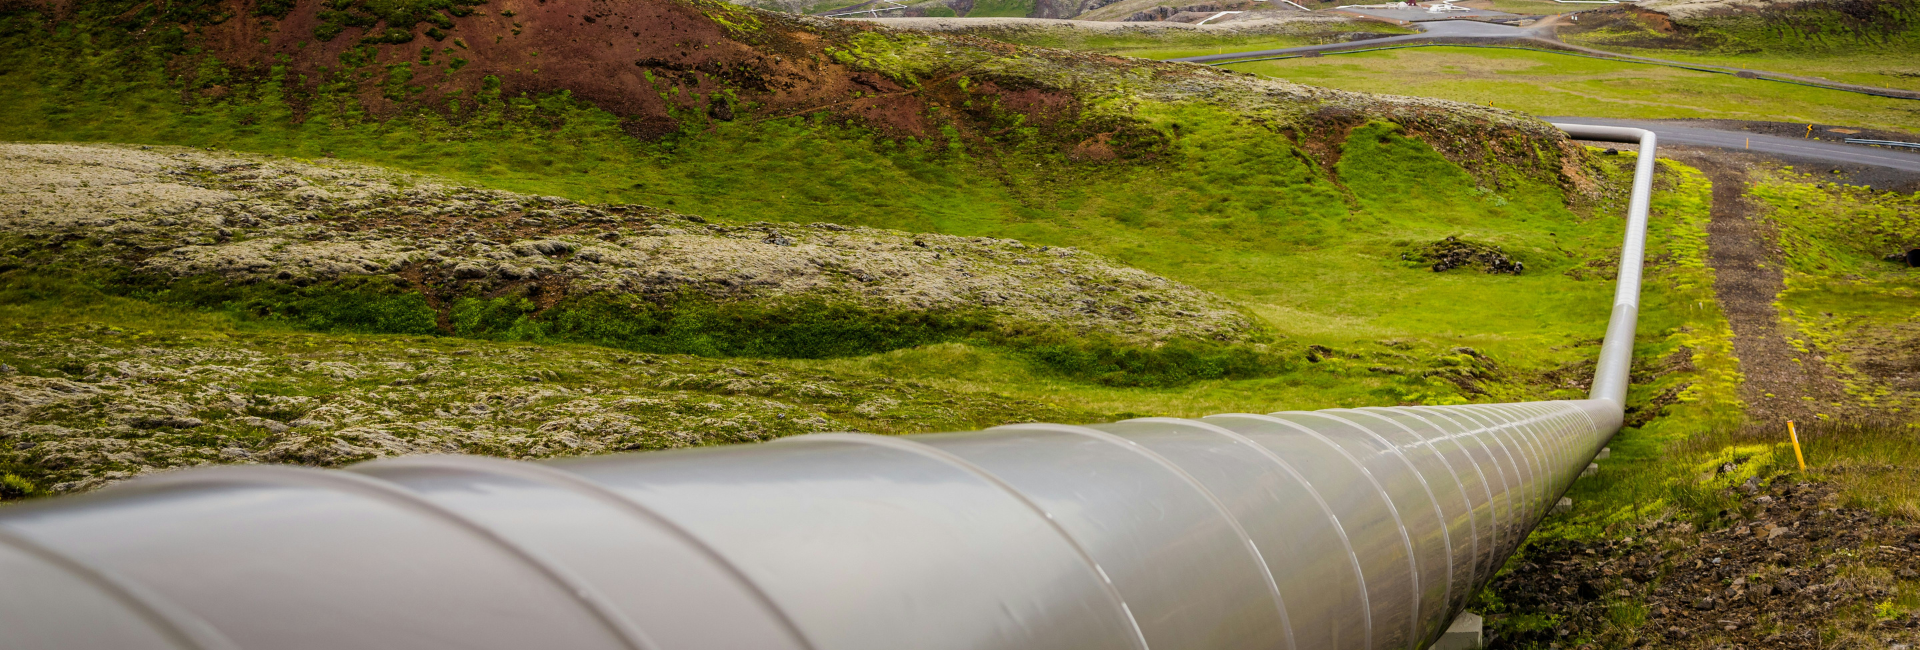 A large pipeline on a grassy hill